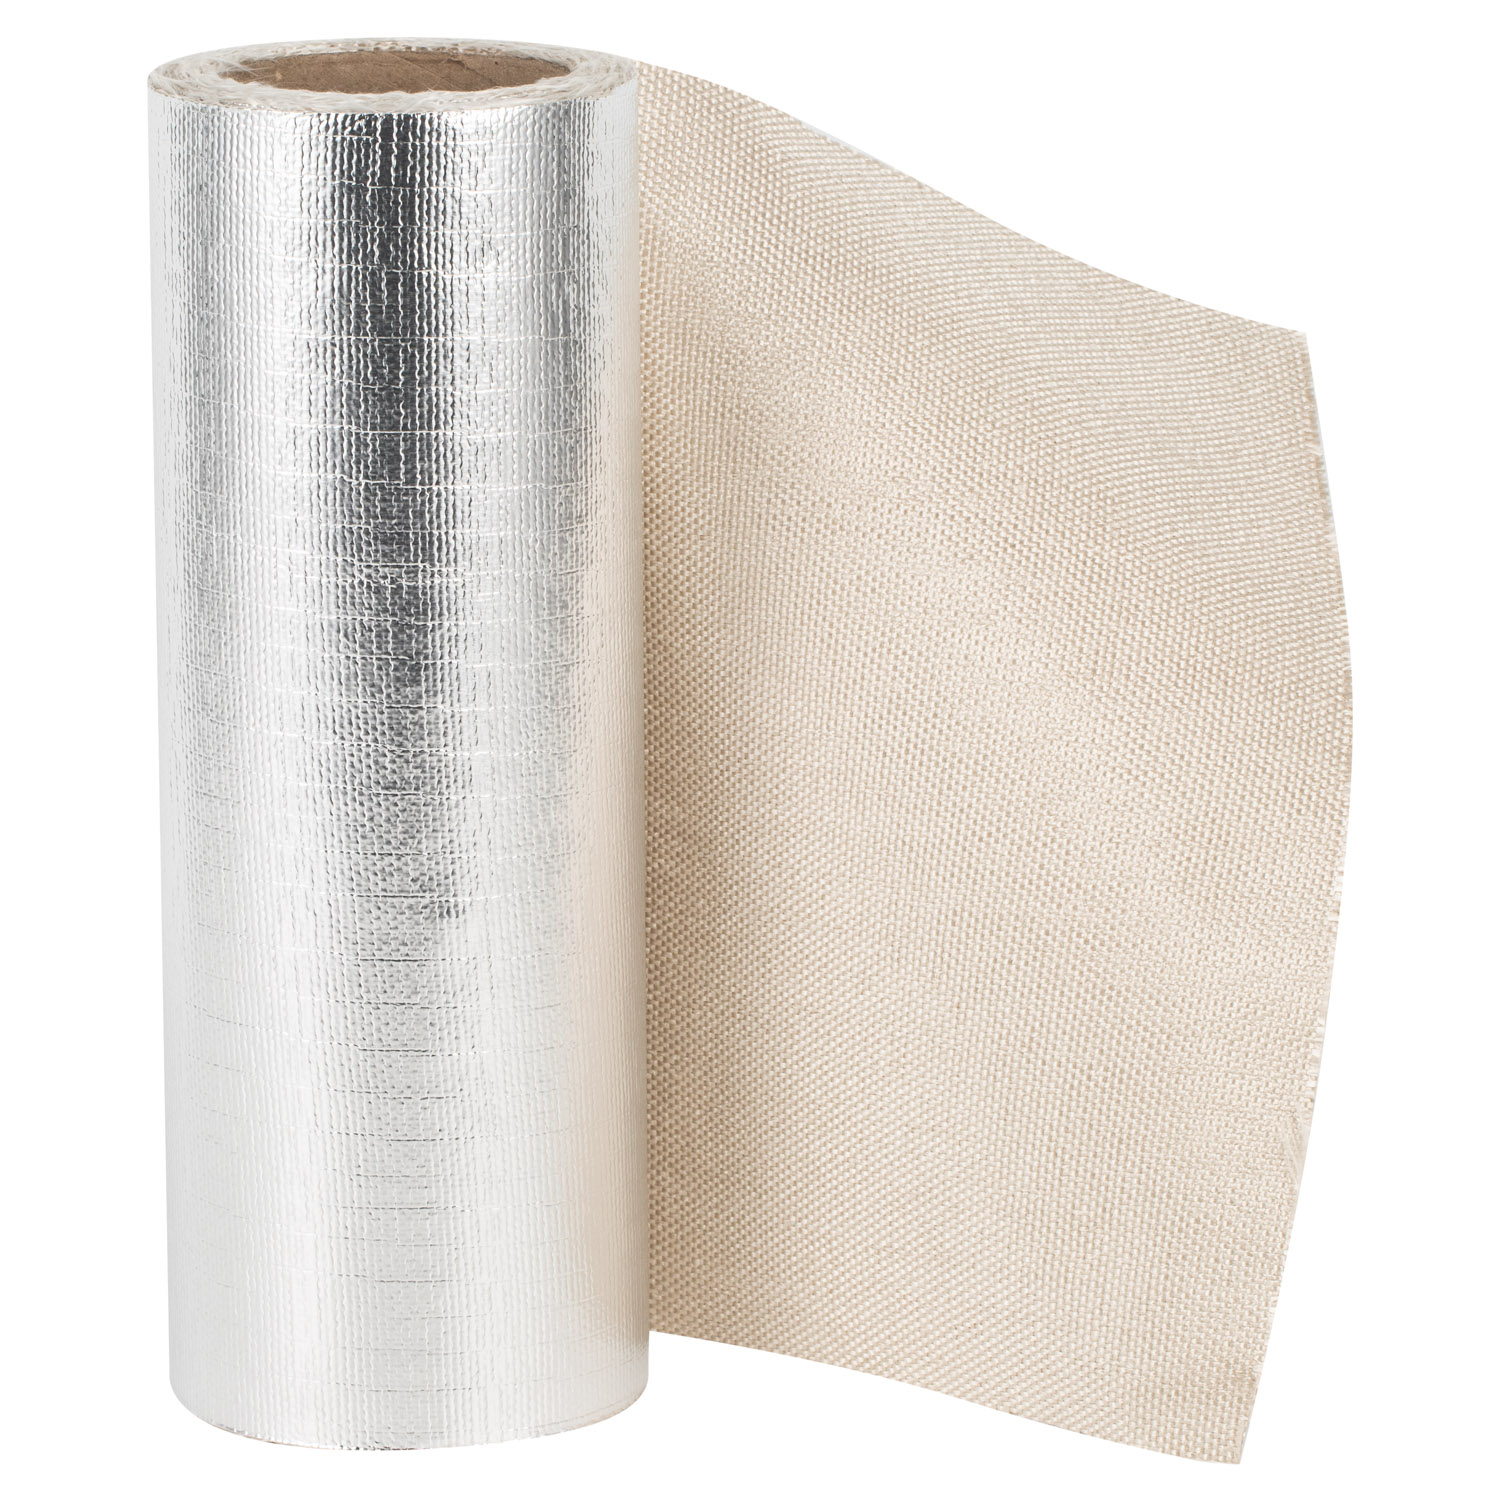 Understanding the Efficiency and Benefits of Aluminum Foil Fabric as a Thermal Insulator